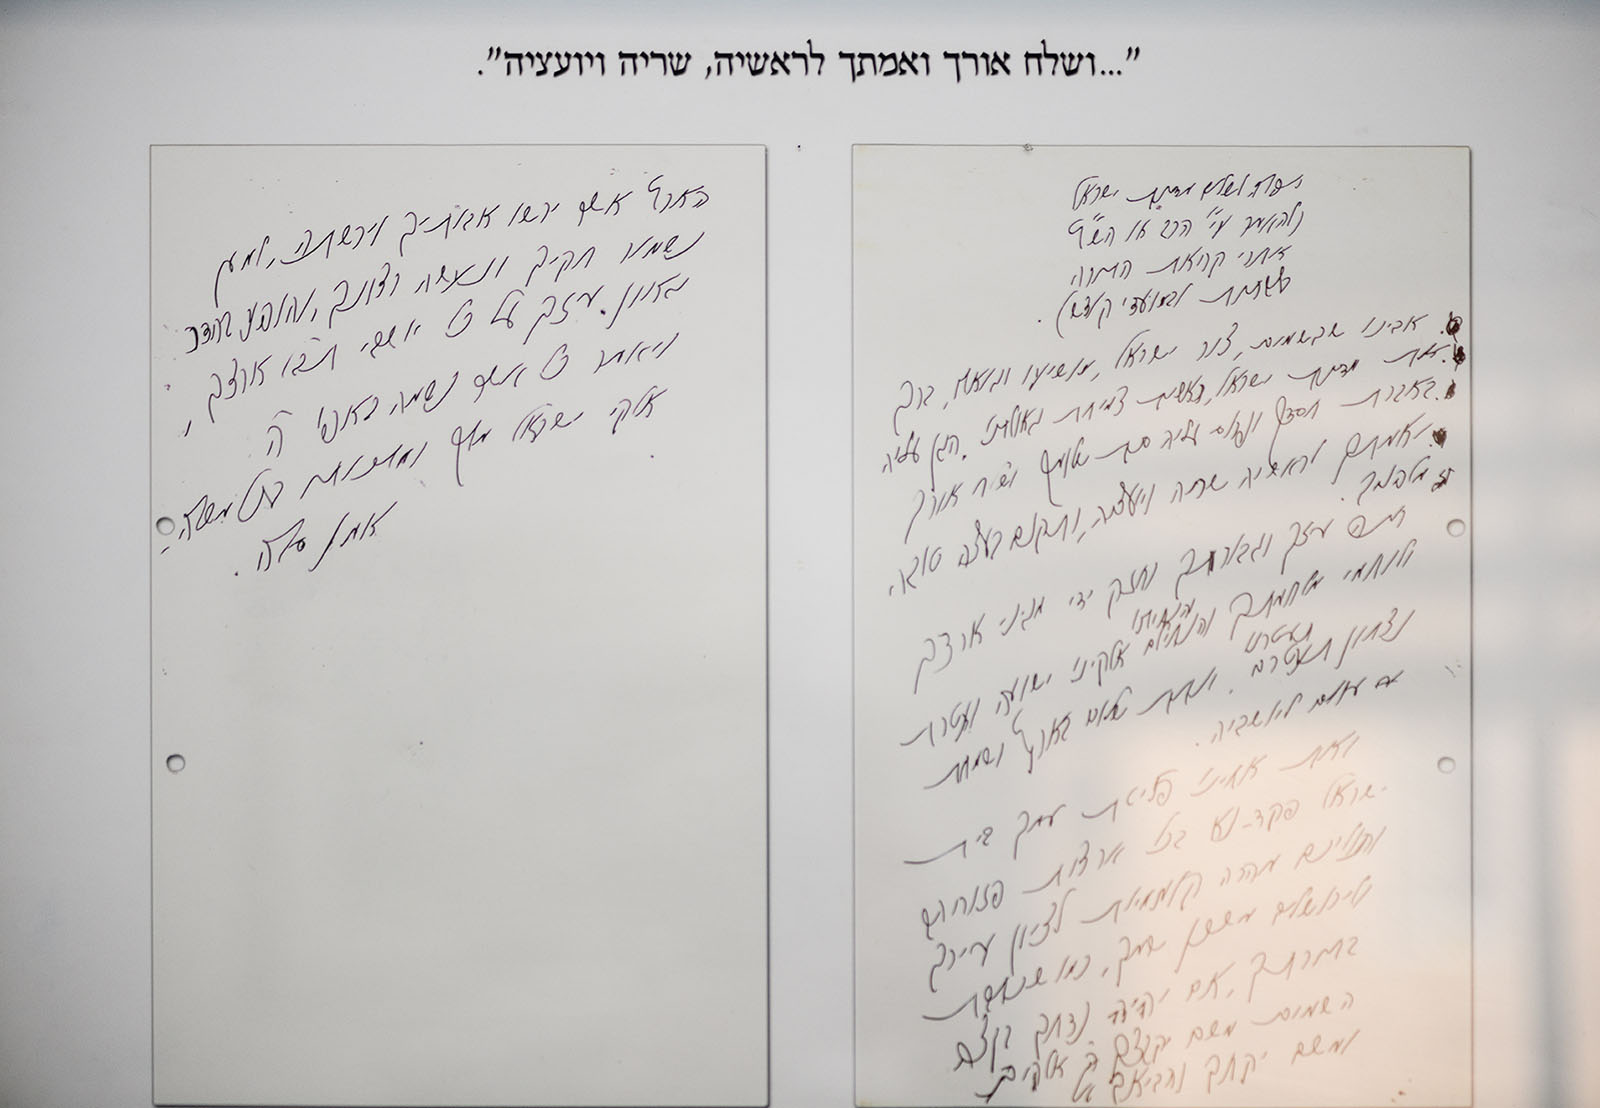 The Prayer for the Welfare of the State in the handwriting of Rabbi Itzhak Isaac HaLevi Herzog (photograph: Jonathan Bloom)